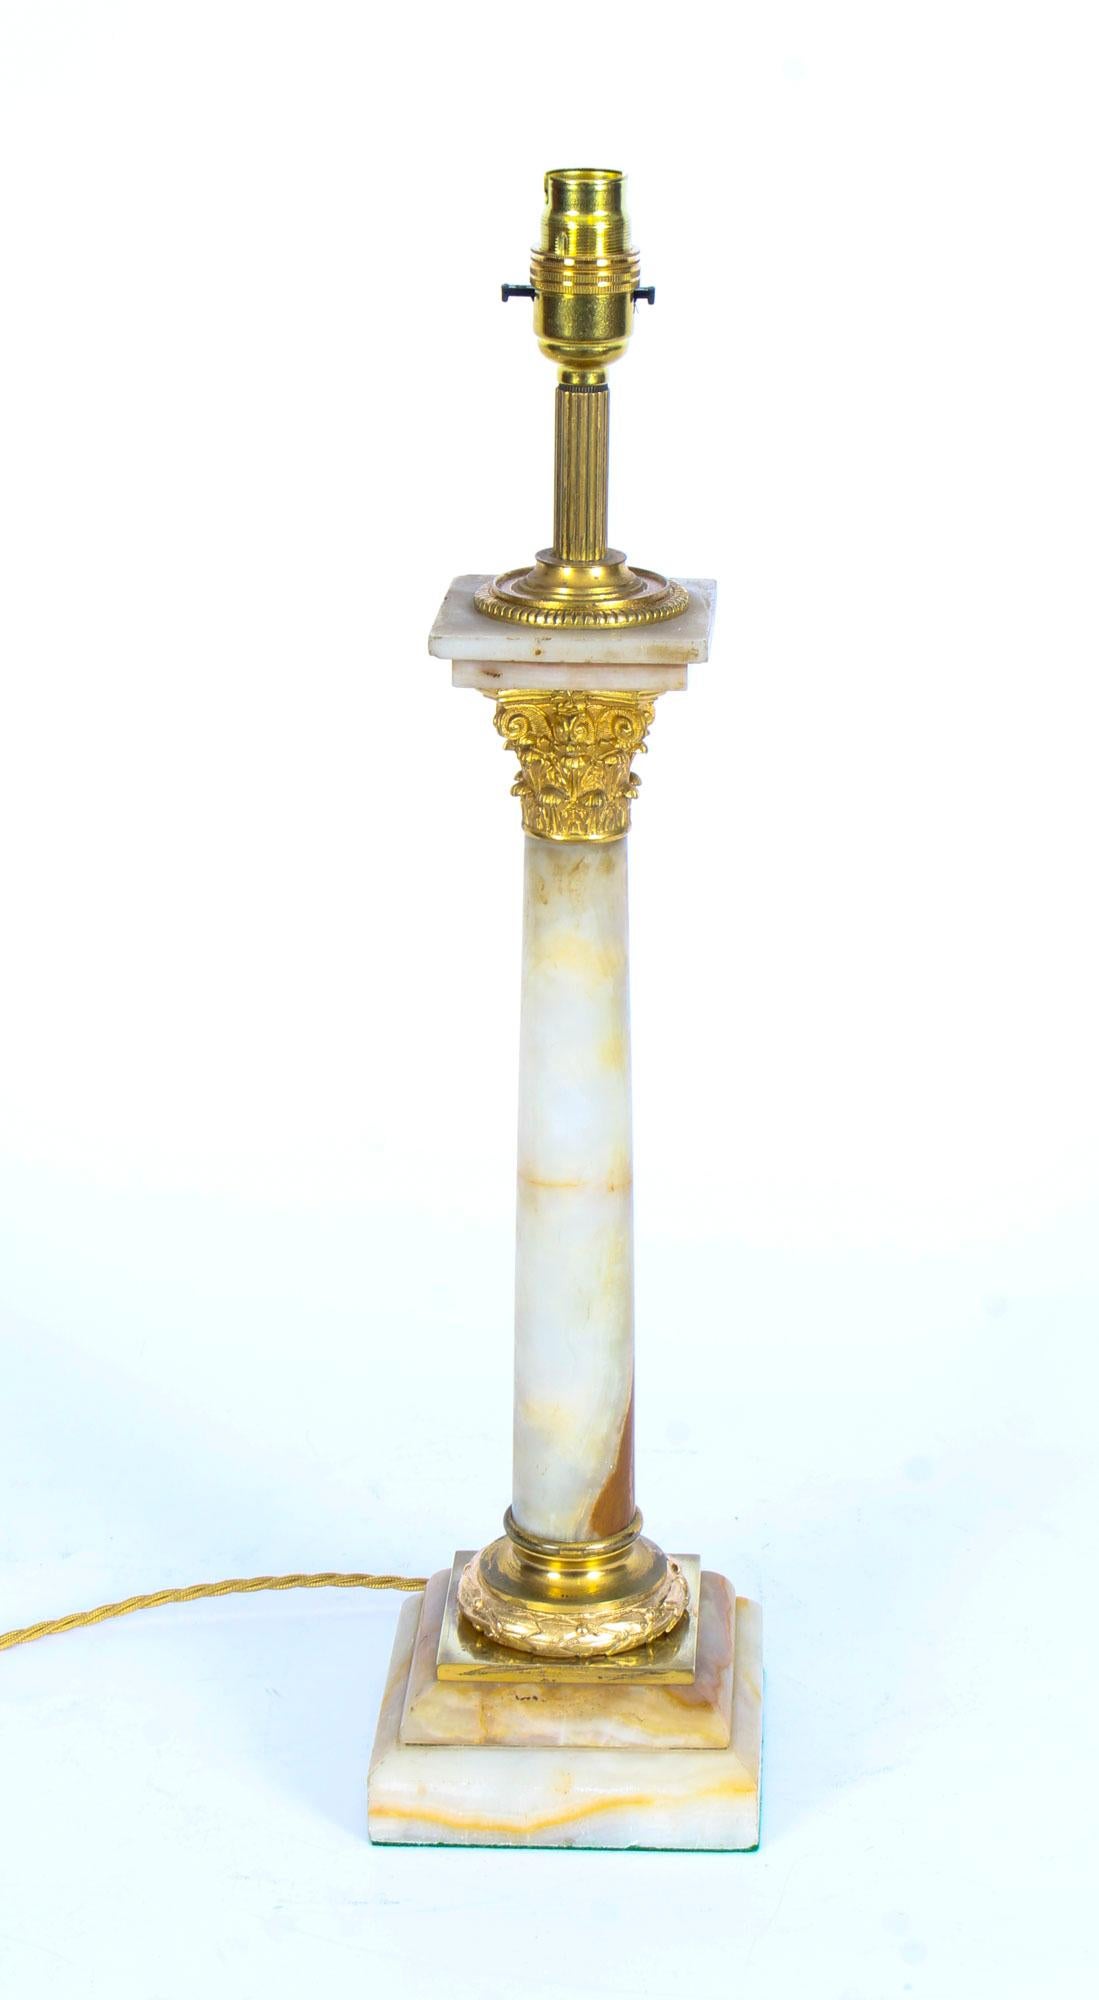 This is a splendid antique late Victorian ormolu mounted onyx Corinthian column table lamp now converted to electricity, circa 1880 in date.

This opulent antique table lamp features a finely cast ormolu Corinthian Capital decorated above a striking